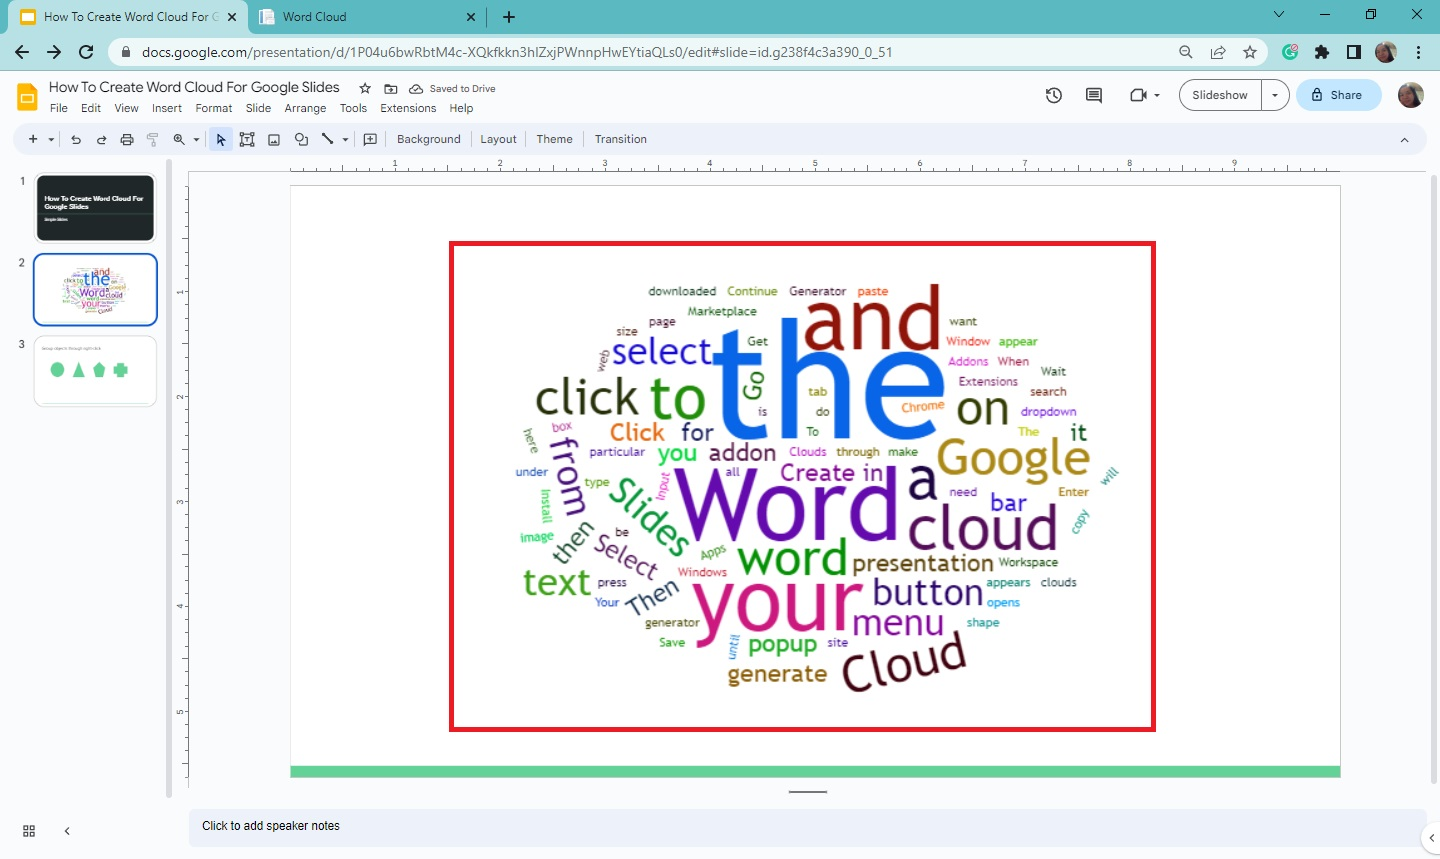 Move and drag your word cloud once it appears on your presentation slide.